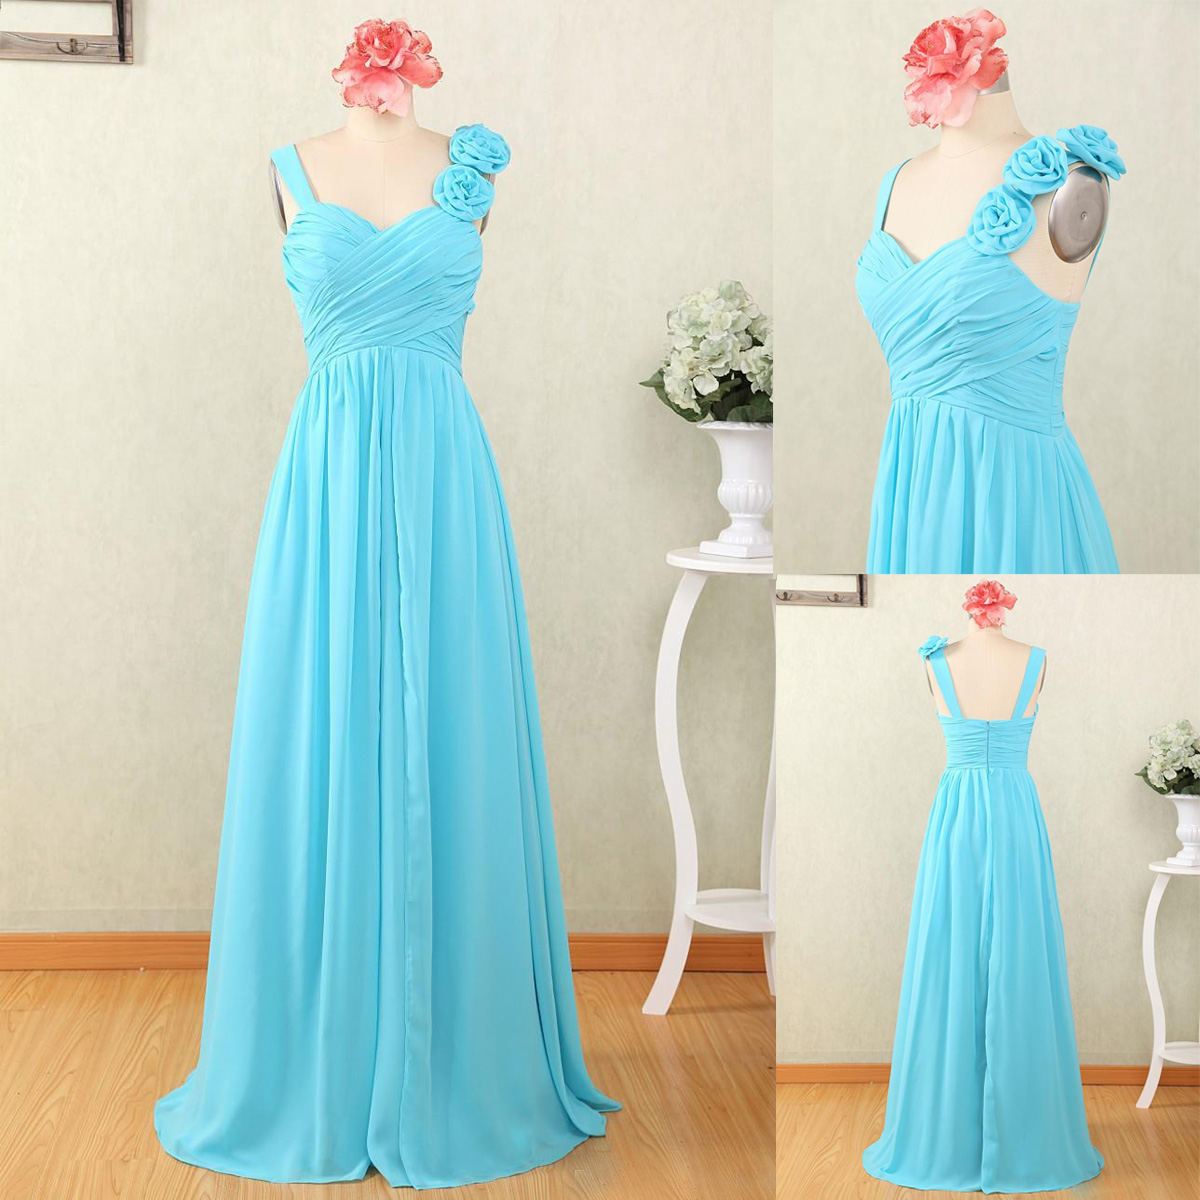 Sky Blue Spaghetti Straps Prom Dresses Featuring Floral Shoulder And Ruched Bodice Chiffon Long Formal Evening Gowns